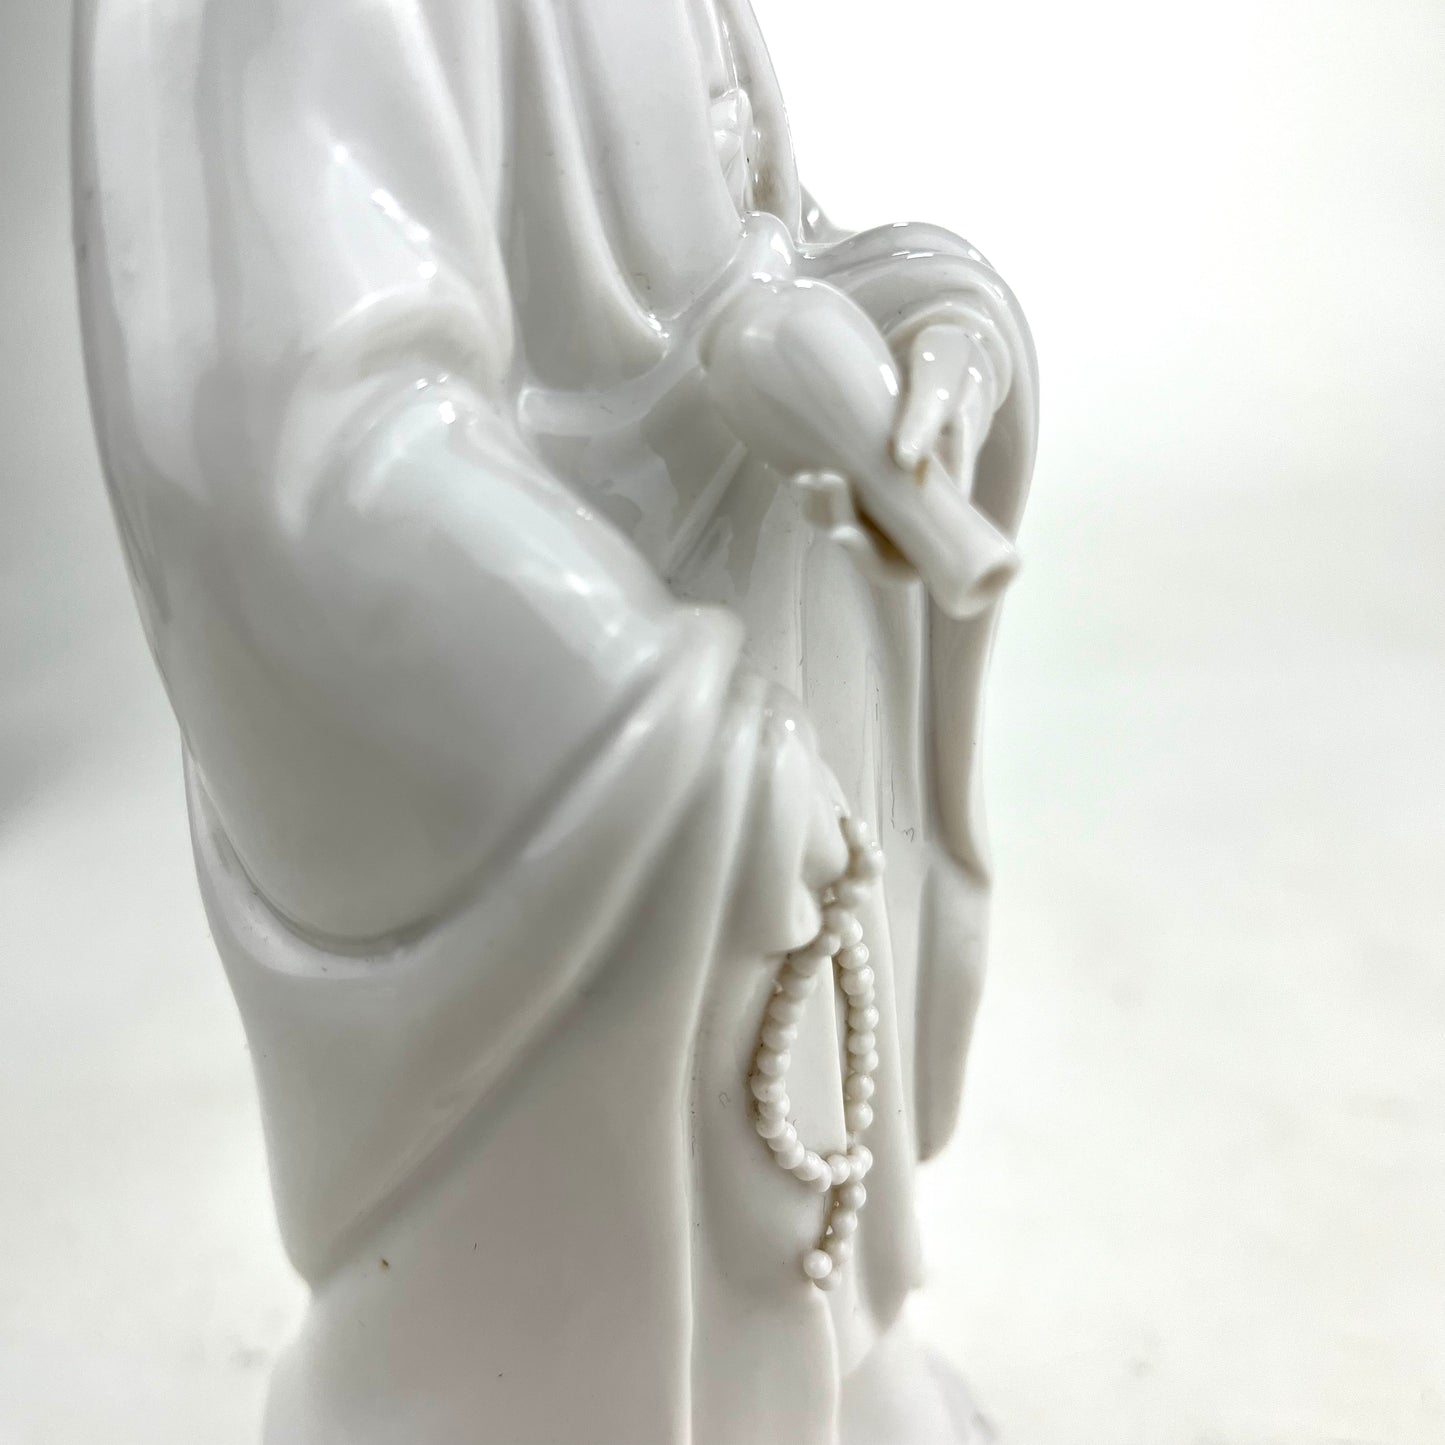 Quan-Yin Statue Porcelain God/Gooddess of Compassion Standing Pose 9”